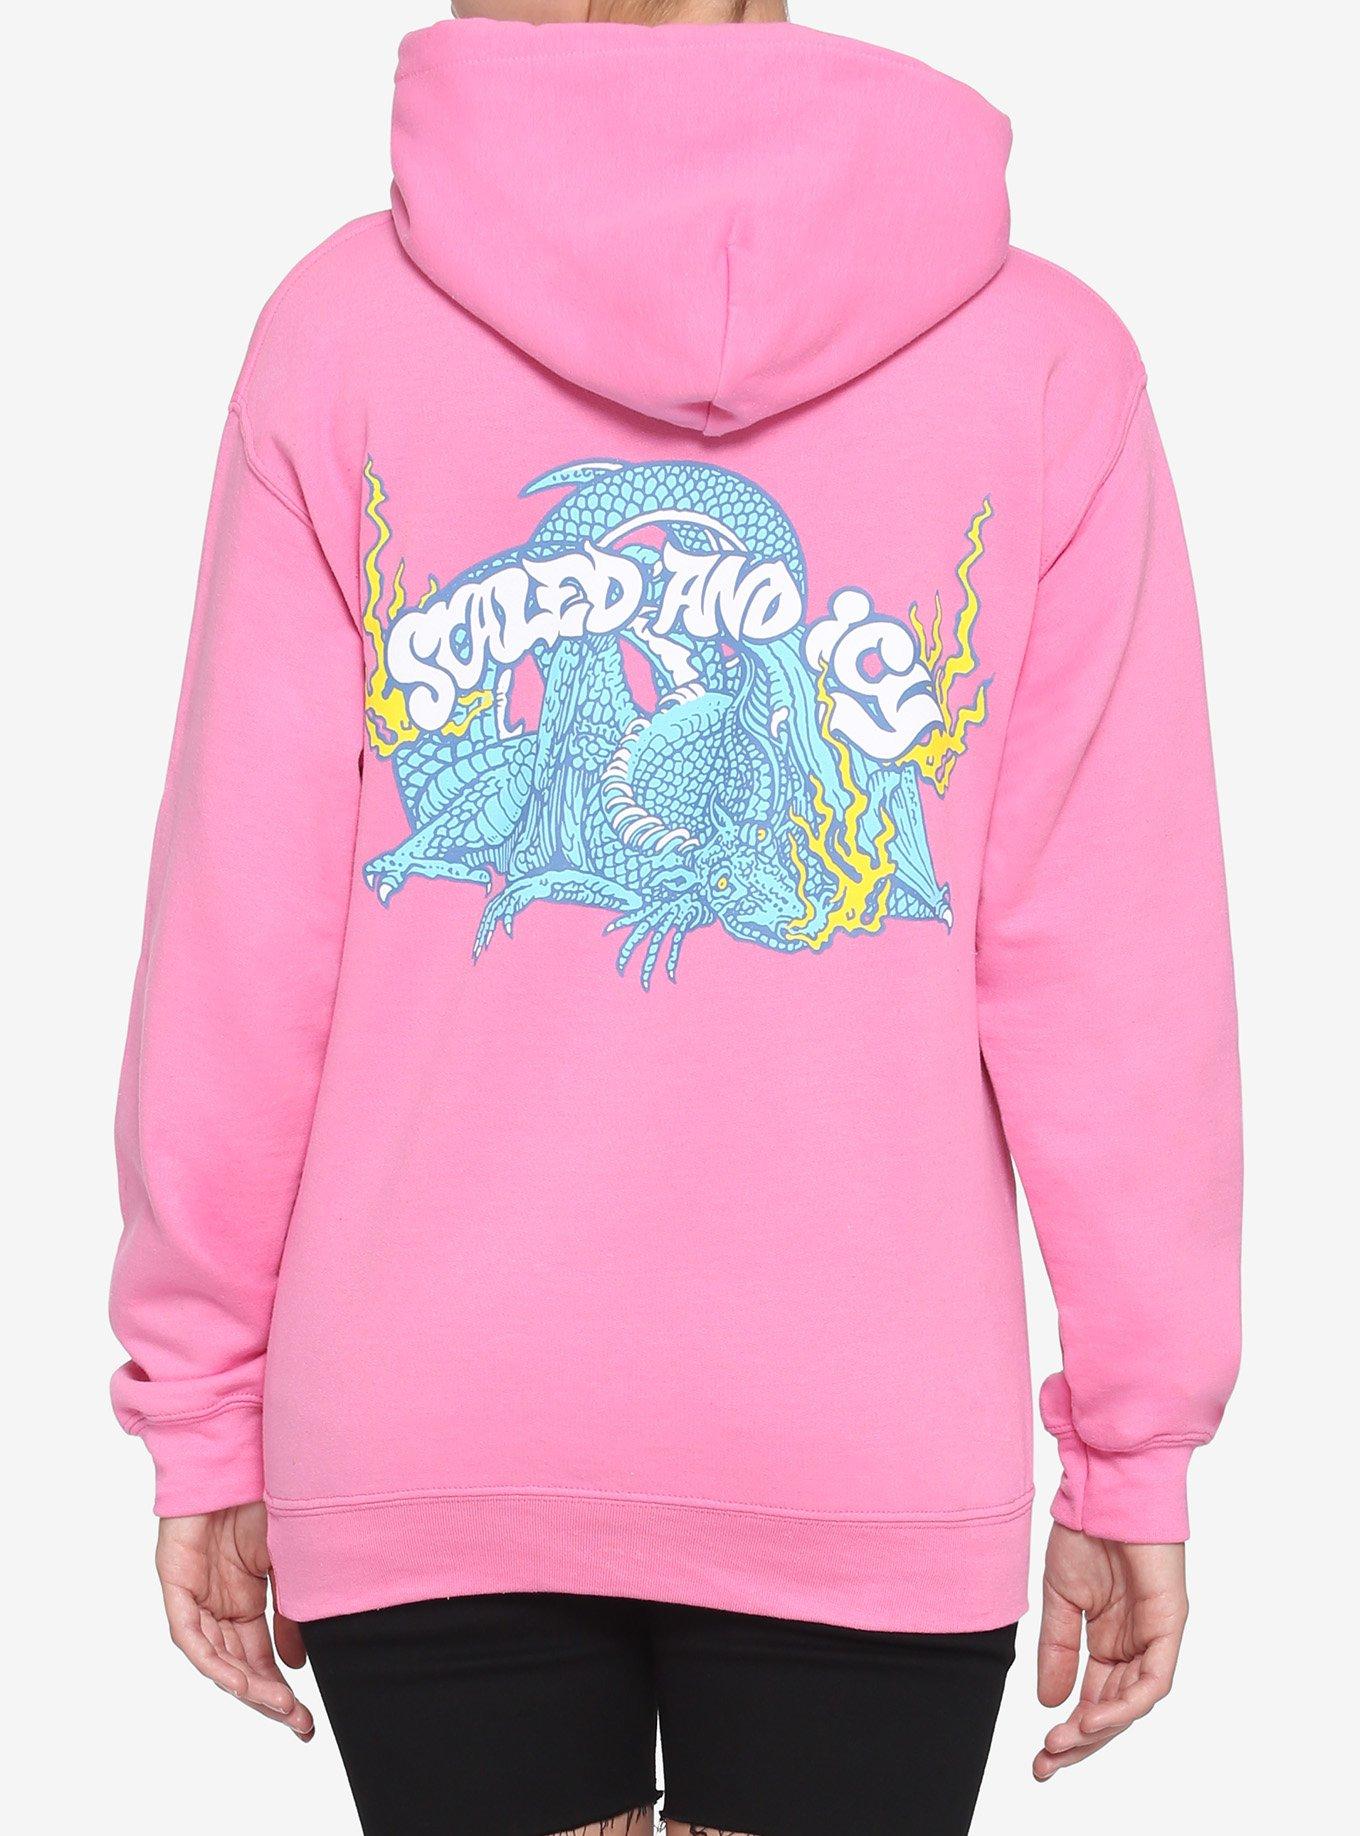 Twenty One Pilots Scaled And Icy Girls Hoodie Hot Topic Exclusive, PINK, alternate